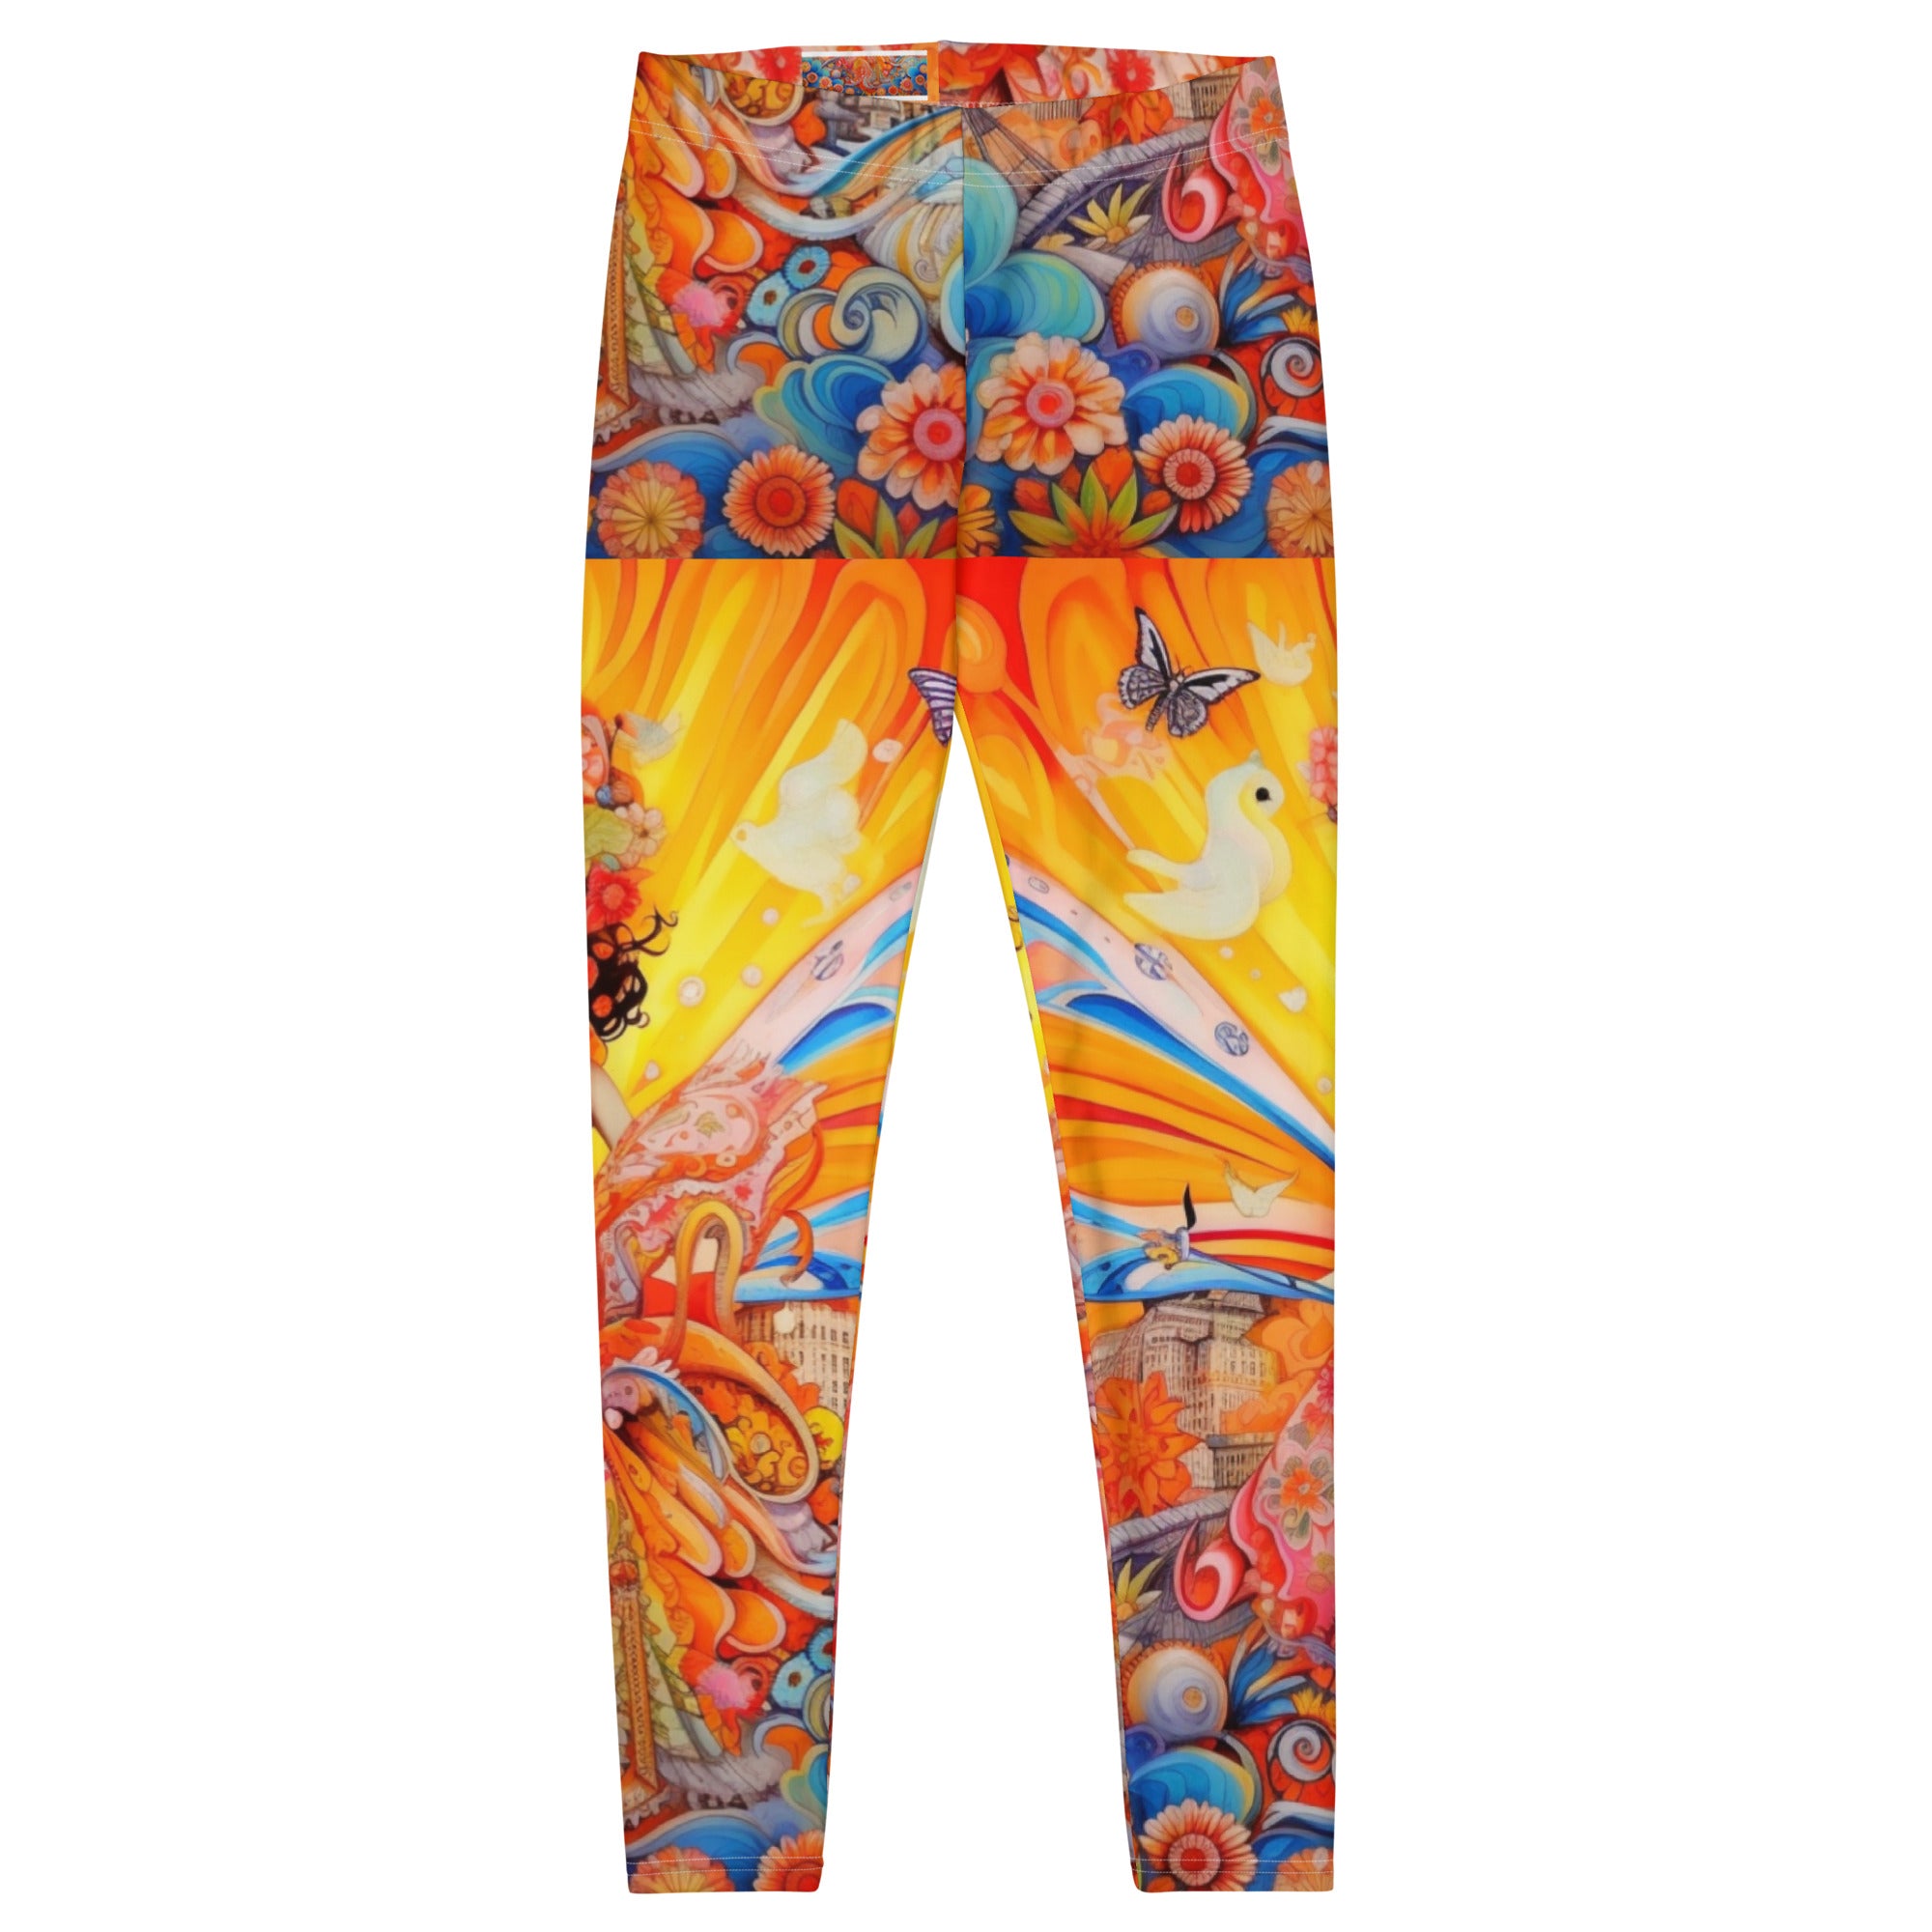 Bring a Touch of Enchantment to Your Wardrobe with Our Colorful Fairy Leggings